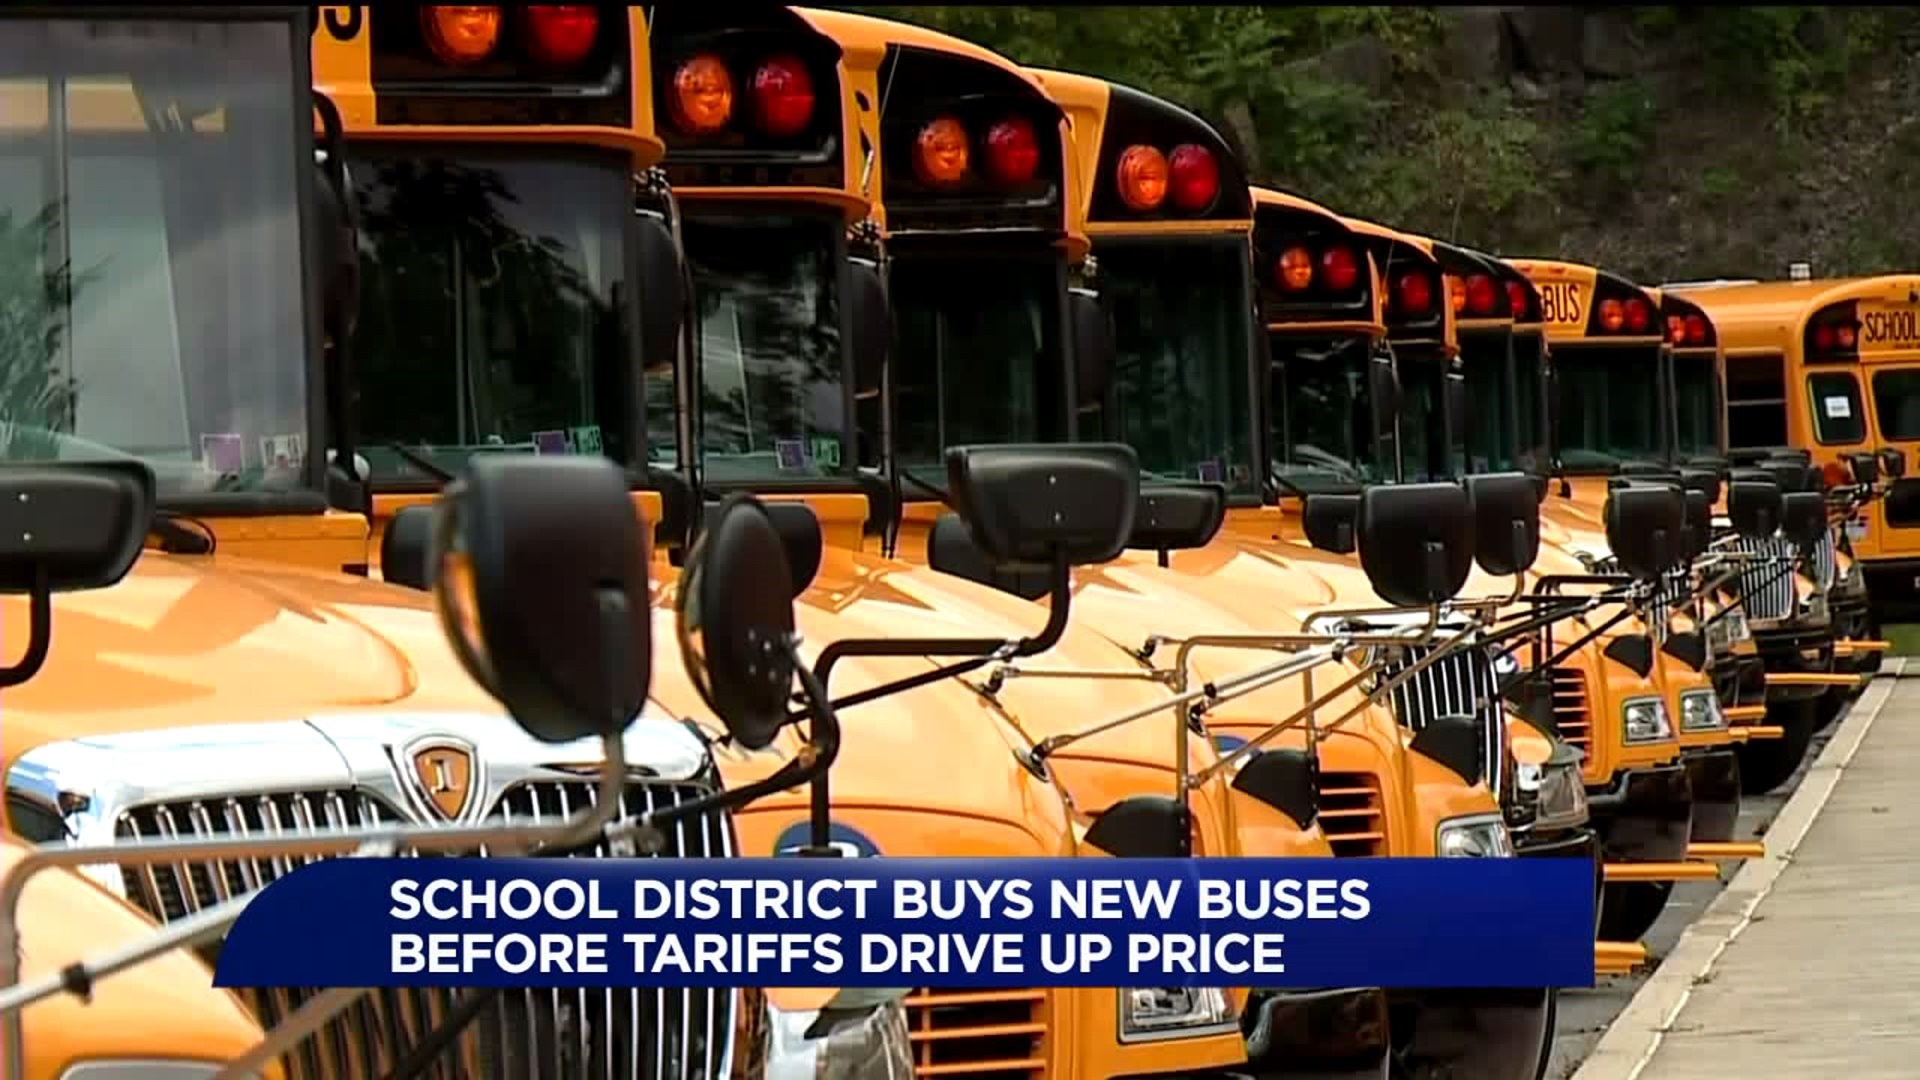 East Stroudsburg Buys New Buses before Tariffs Drive Price Up